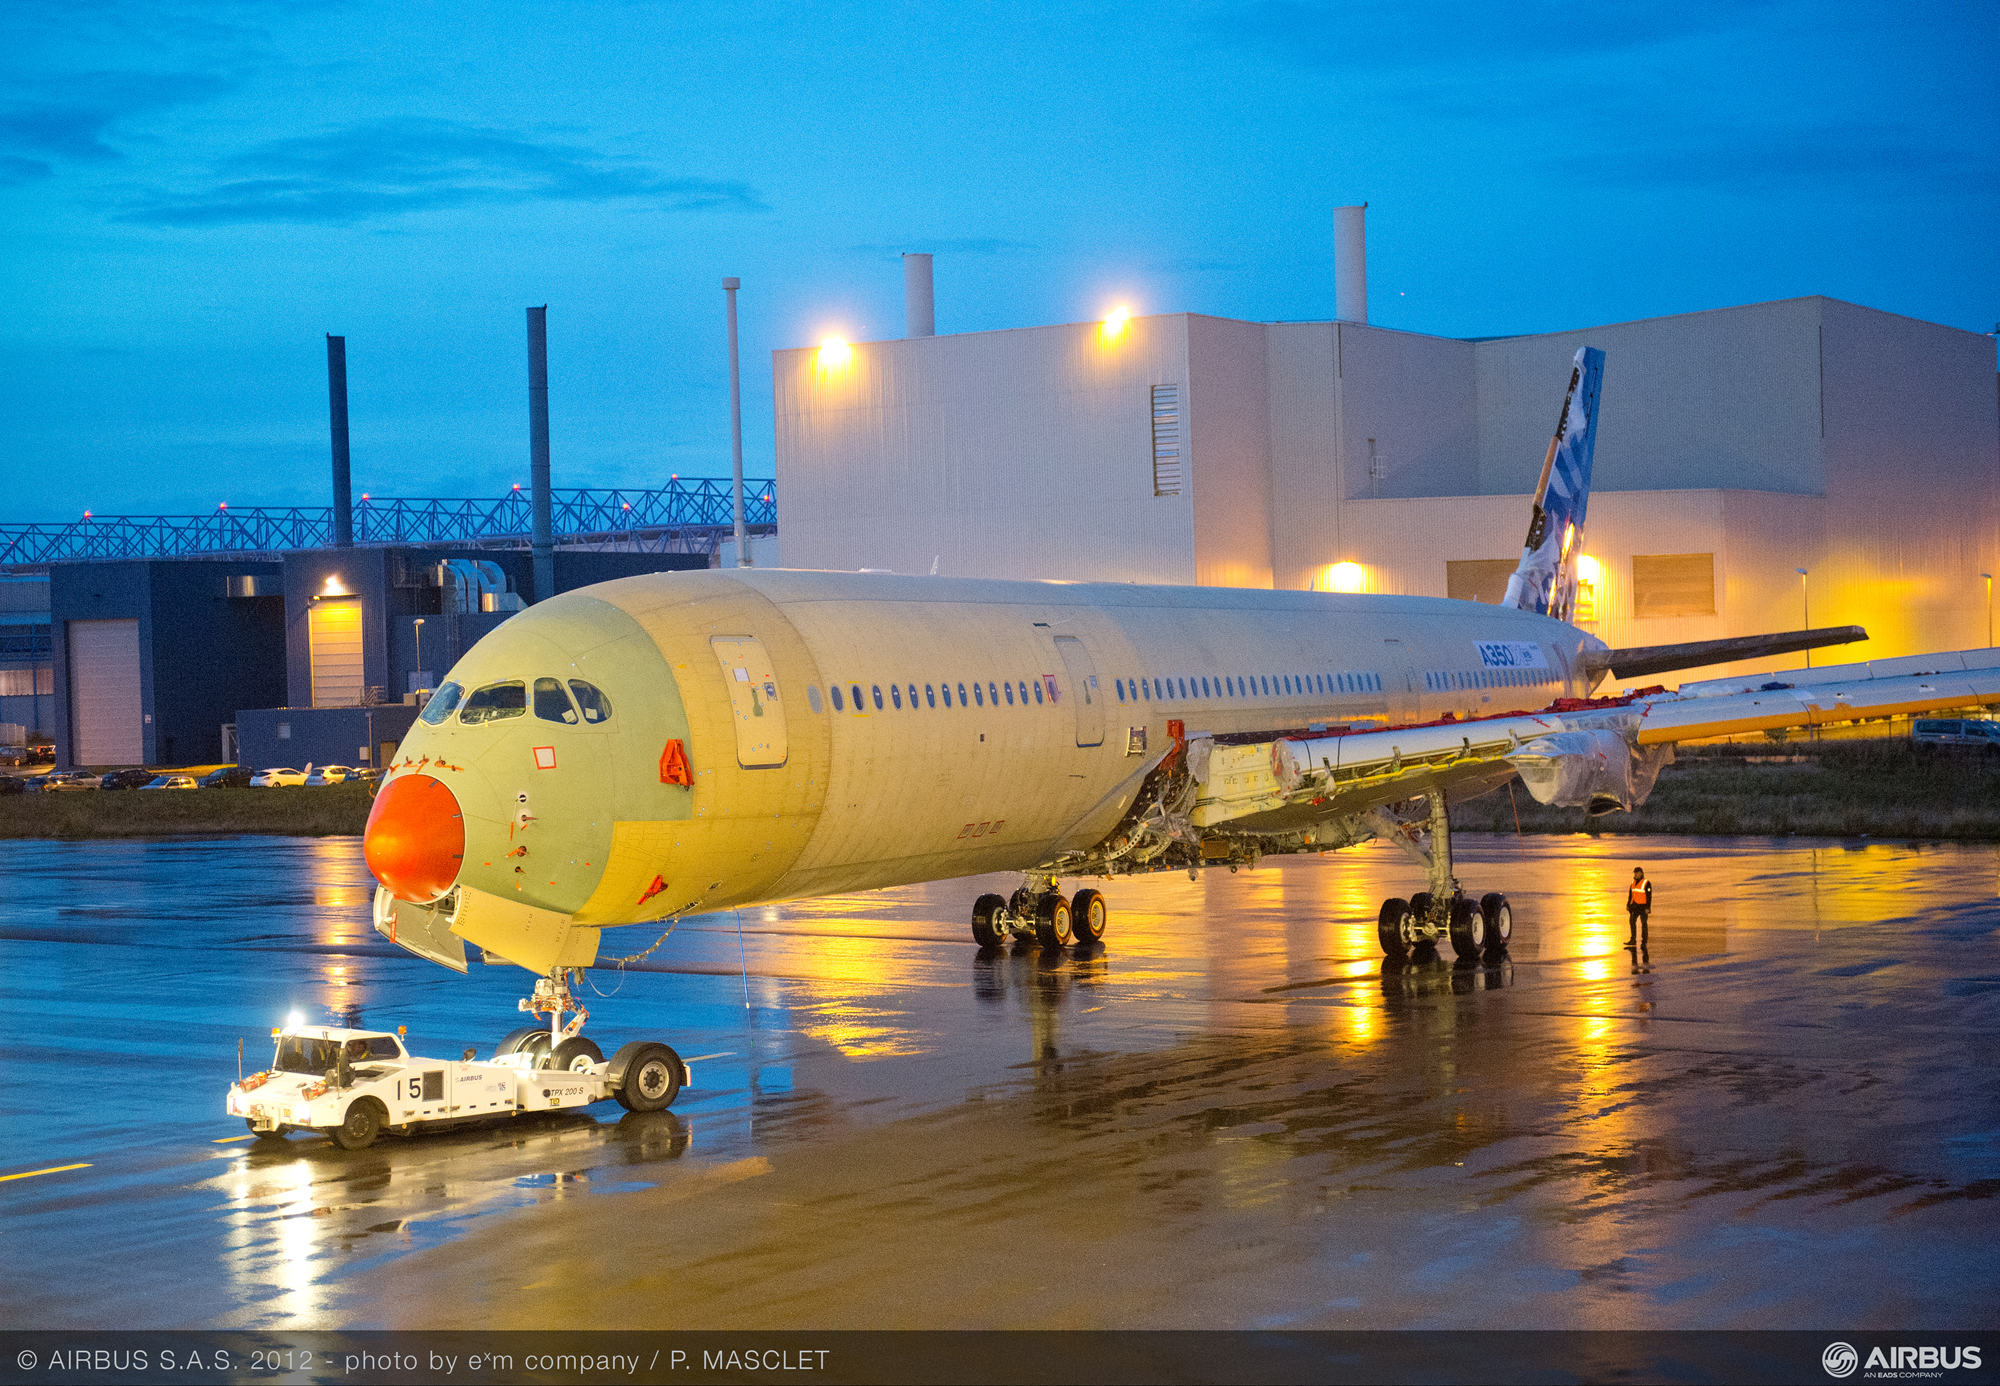 The first A350 XWB flight test aircraft has moved to the Station 30 ground test station at Airbus" final assembly line in Toulouse, France following its structural assembly and initial electrical power-on in the facility"s main assembly hall (Station 40) . Image from Airbus. CLICK FOR LARGER.